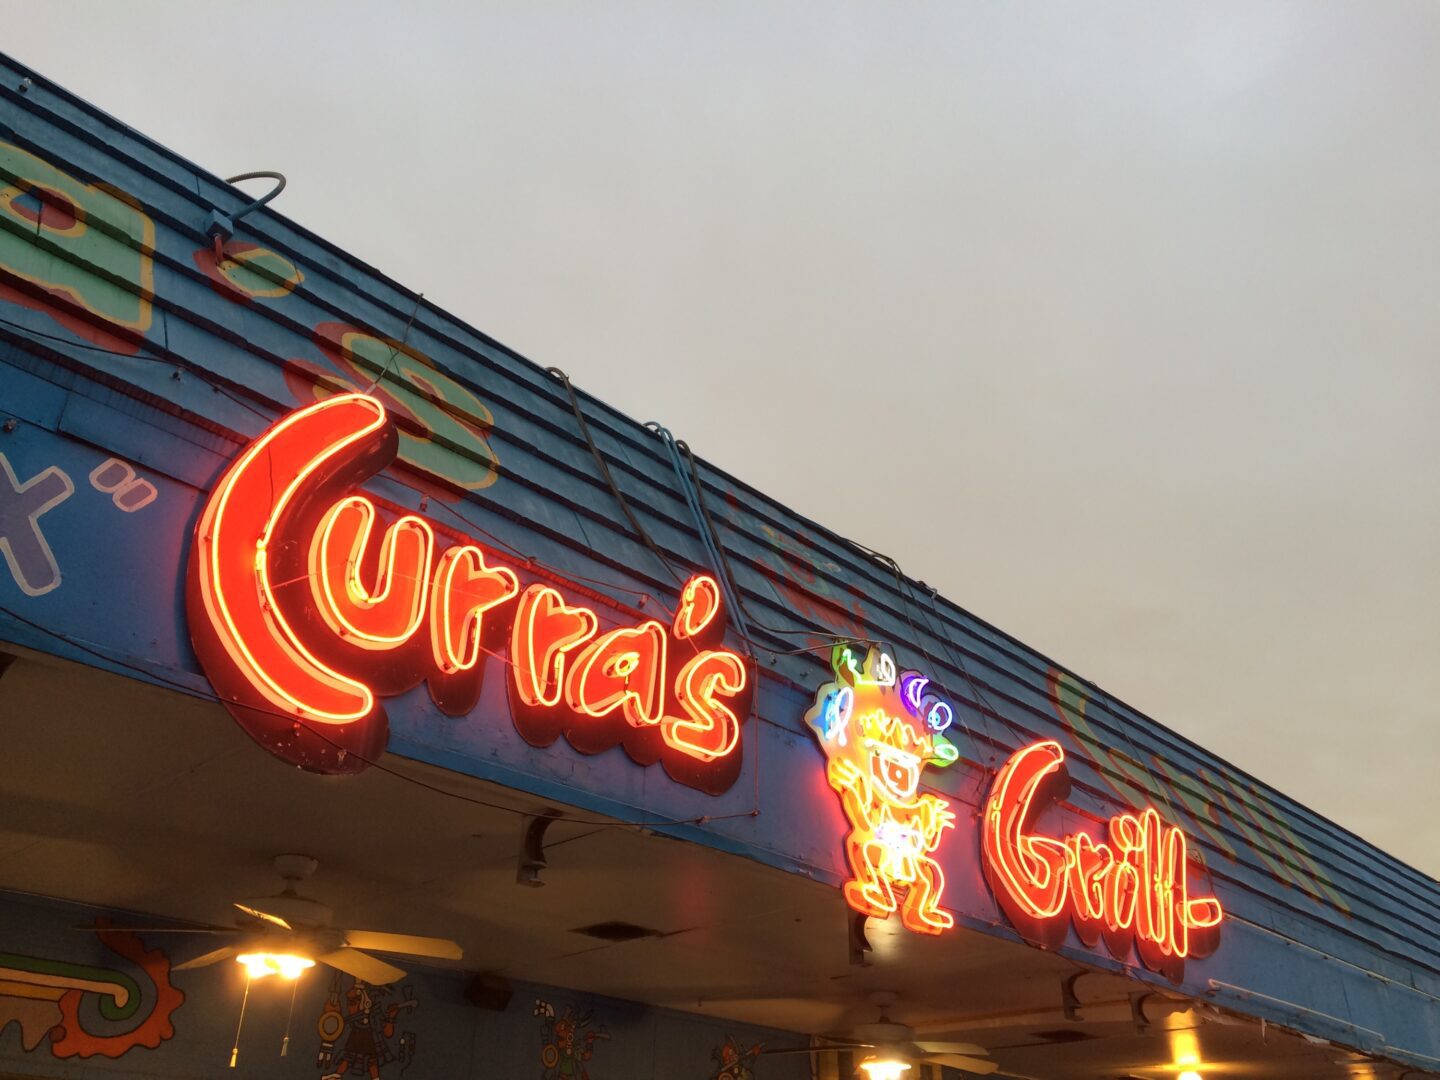 A neon sign for curra's grill on the side of a building.